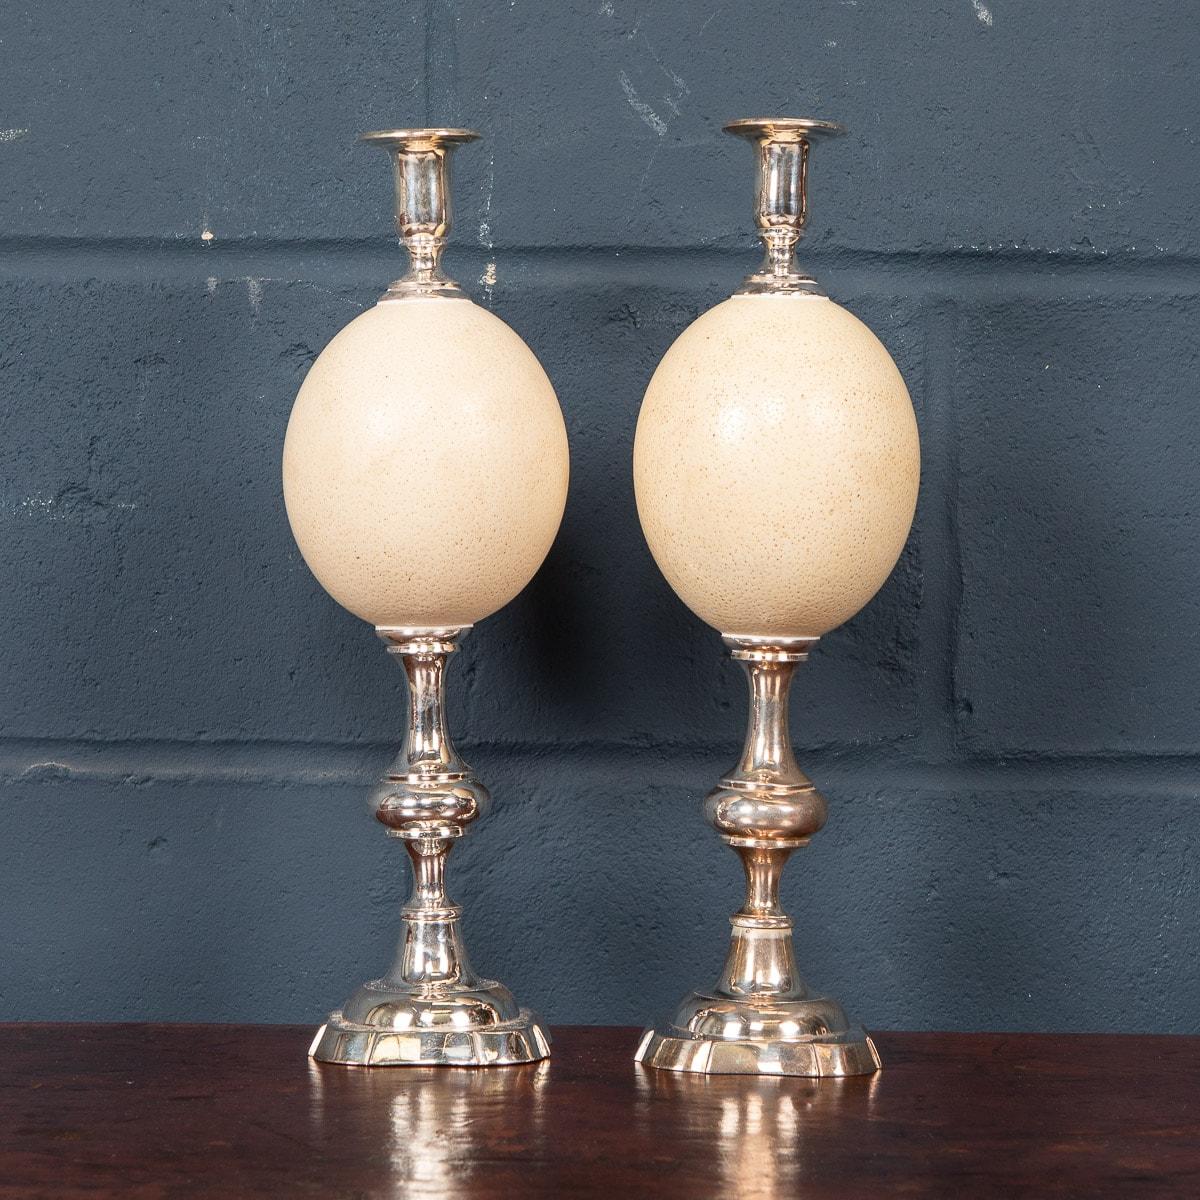 British 20th Century Pair of Silver Plated Candlesticks with Ostrich Egg Body, England